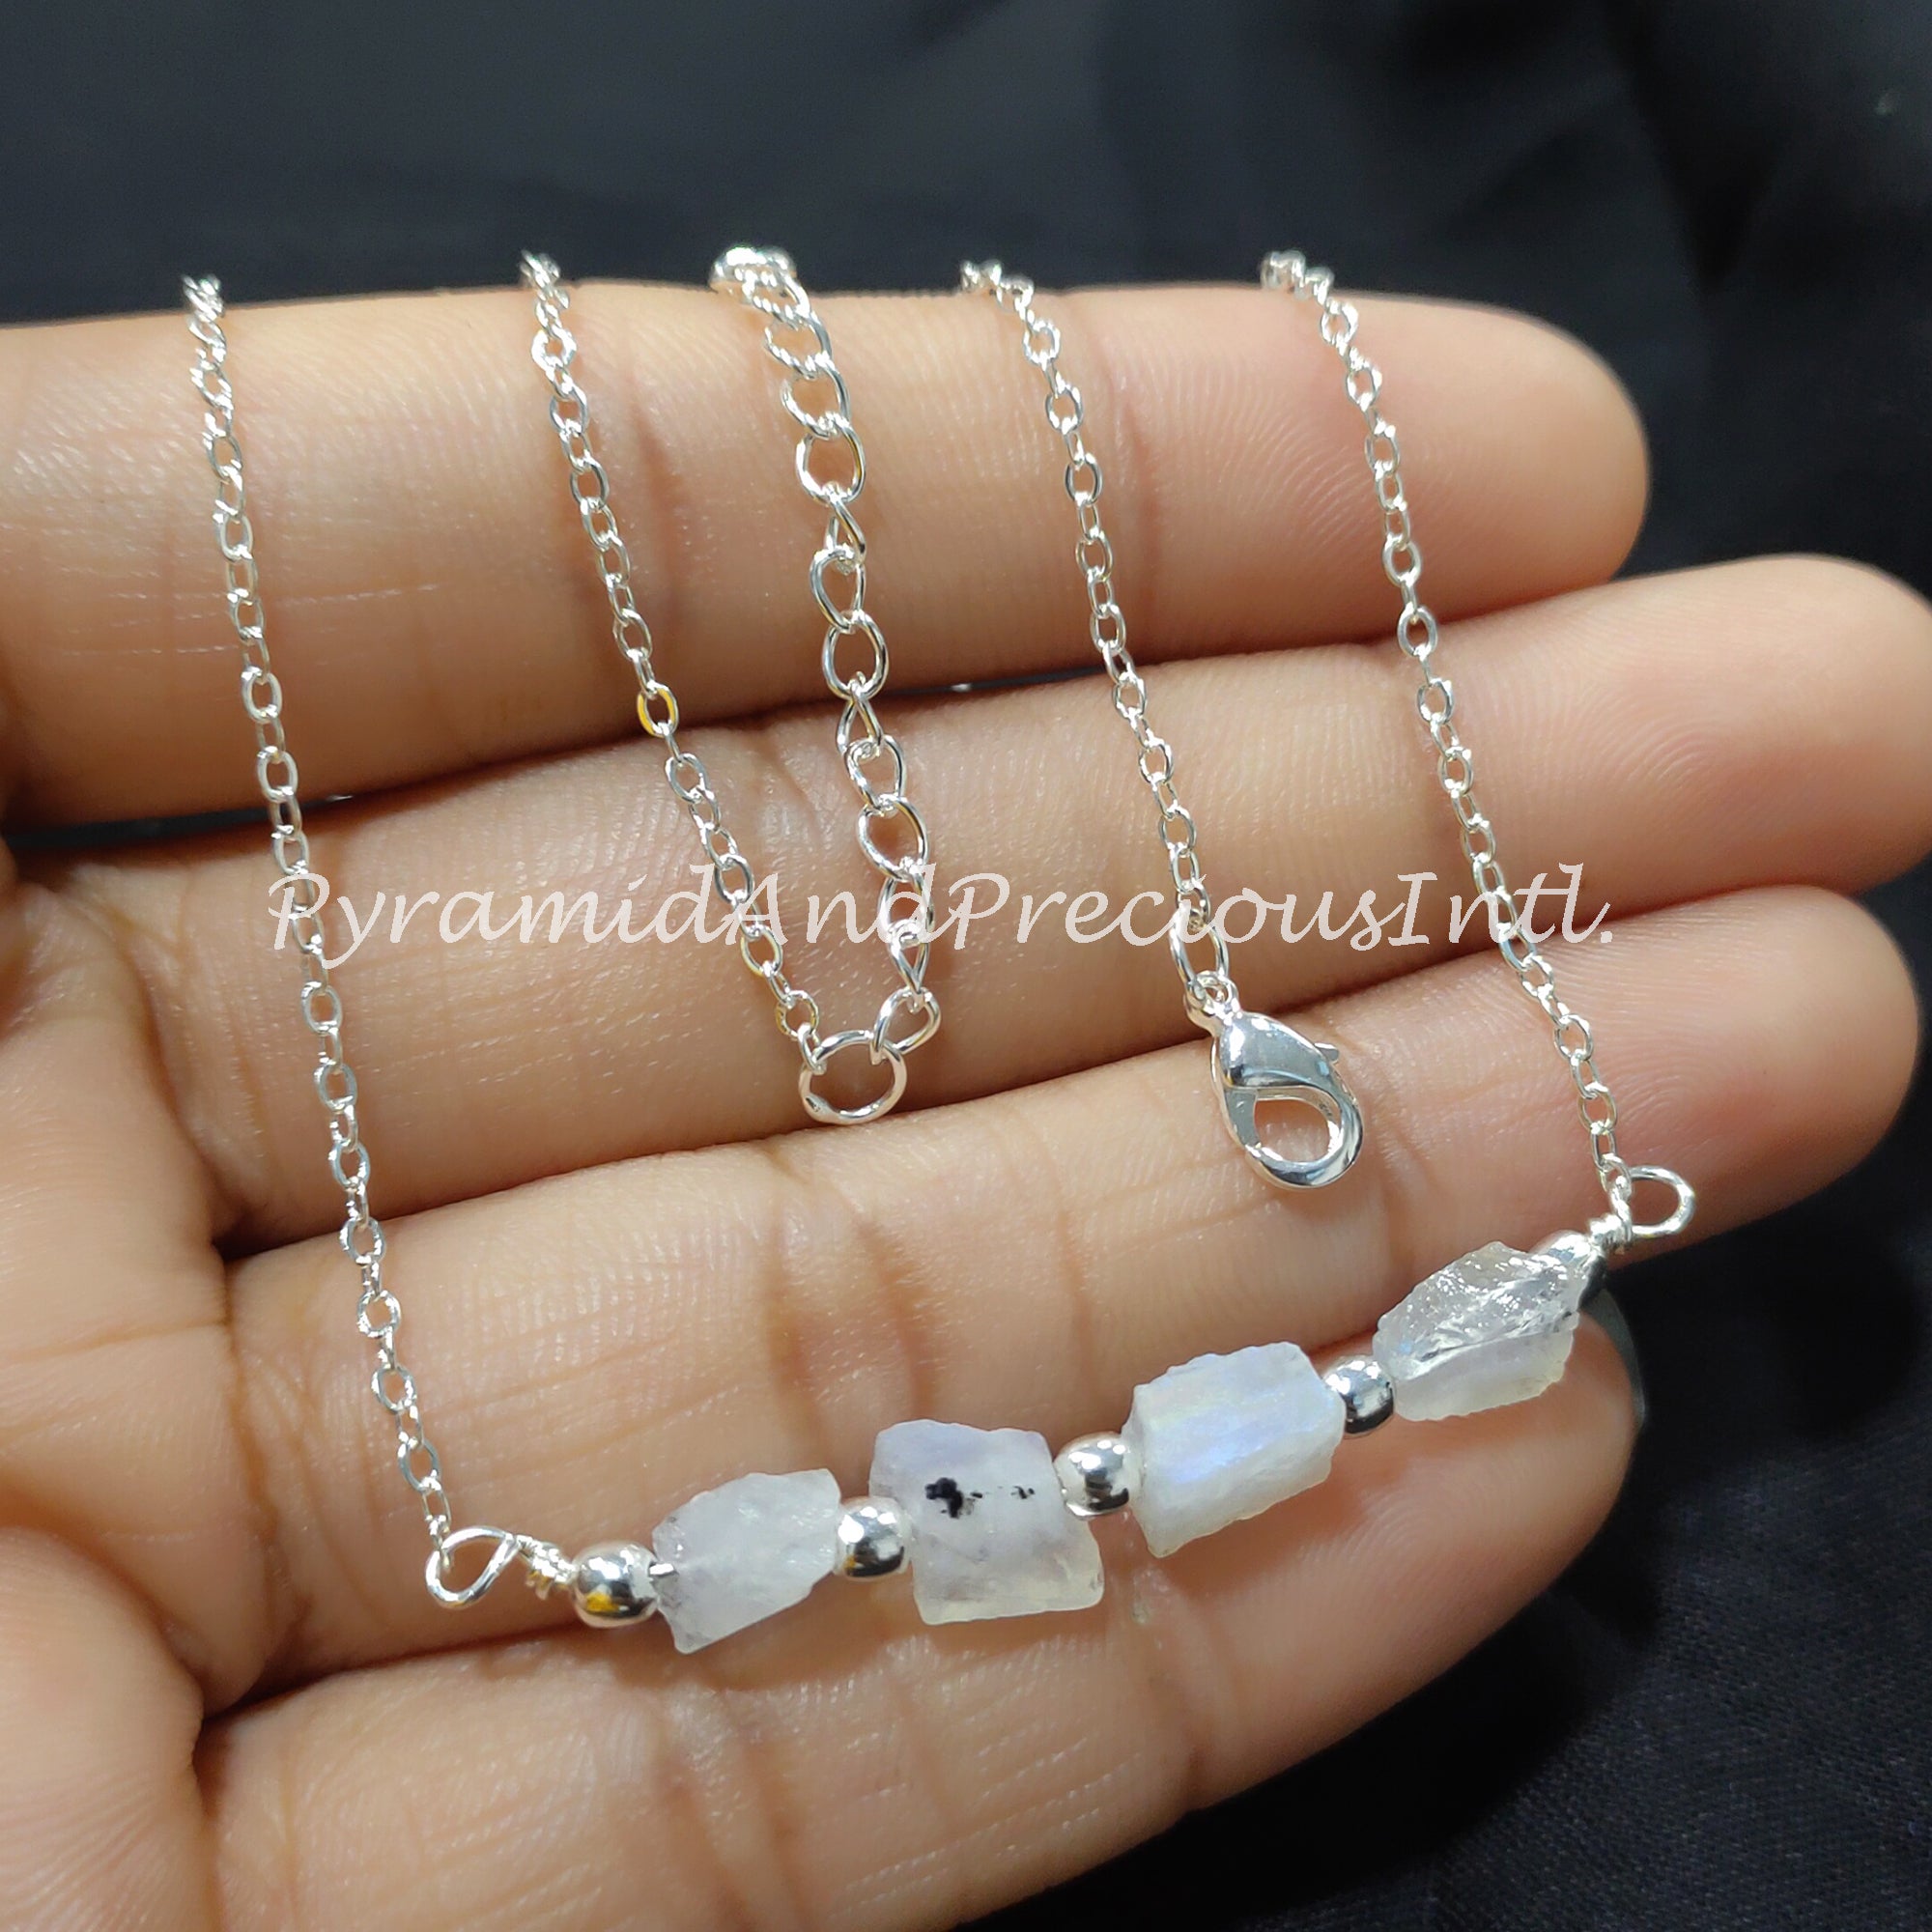 Raw Rainbow Moonstone Necklace, Gemstone Necklace, June Birthstone, Imitation Jewelry, Gift For Her